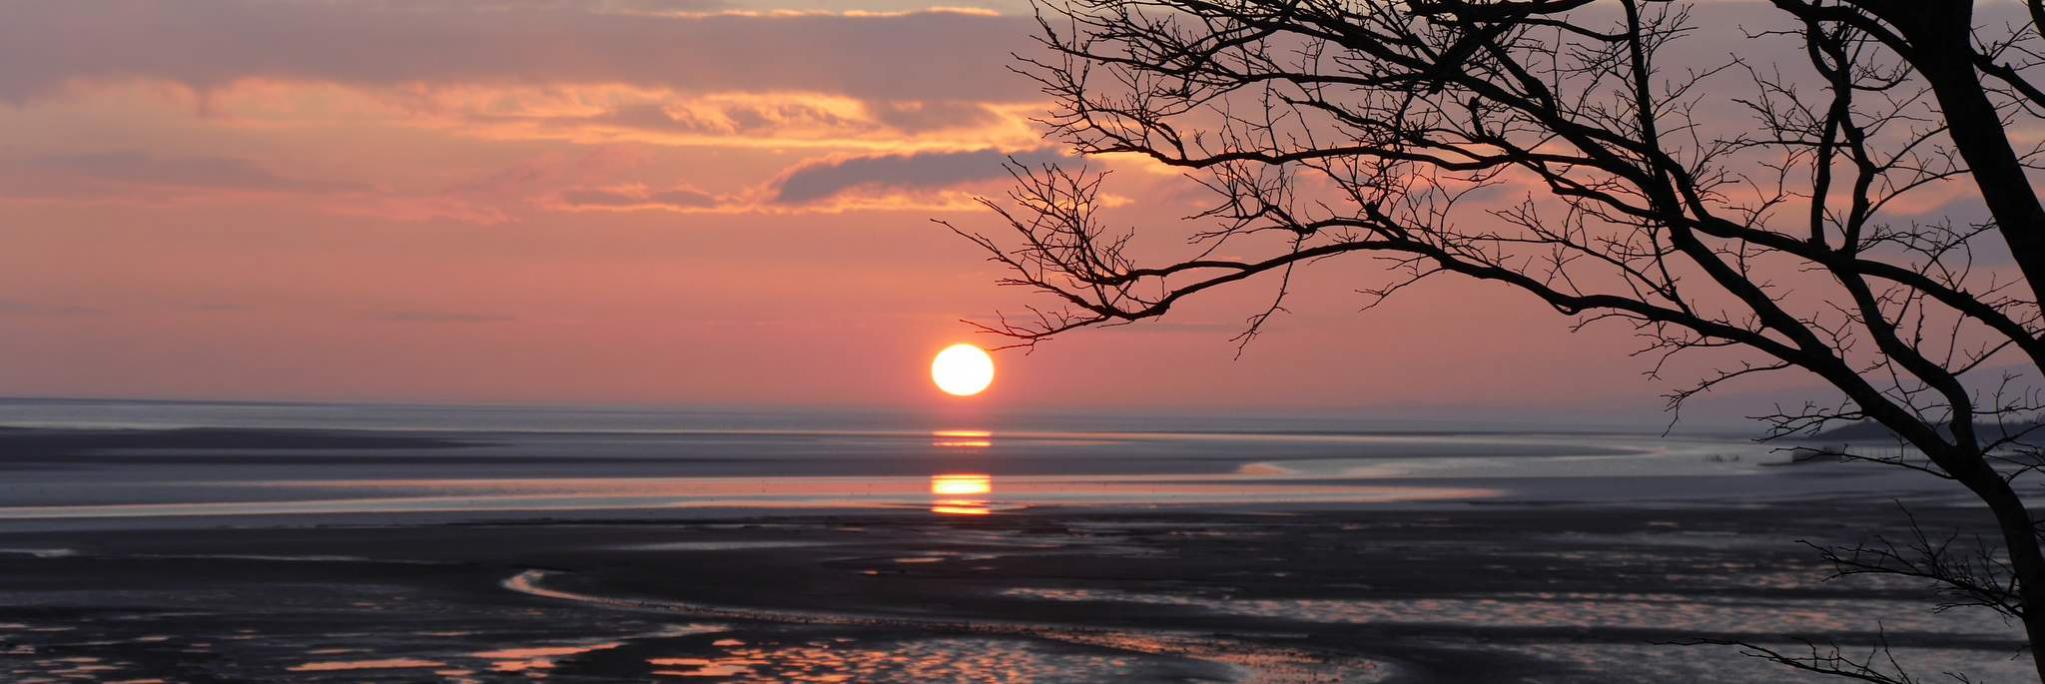 Solway Firth